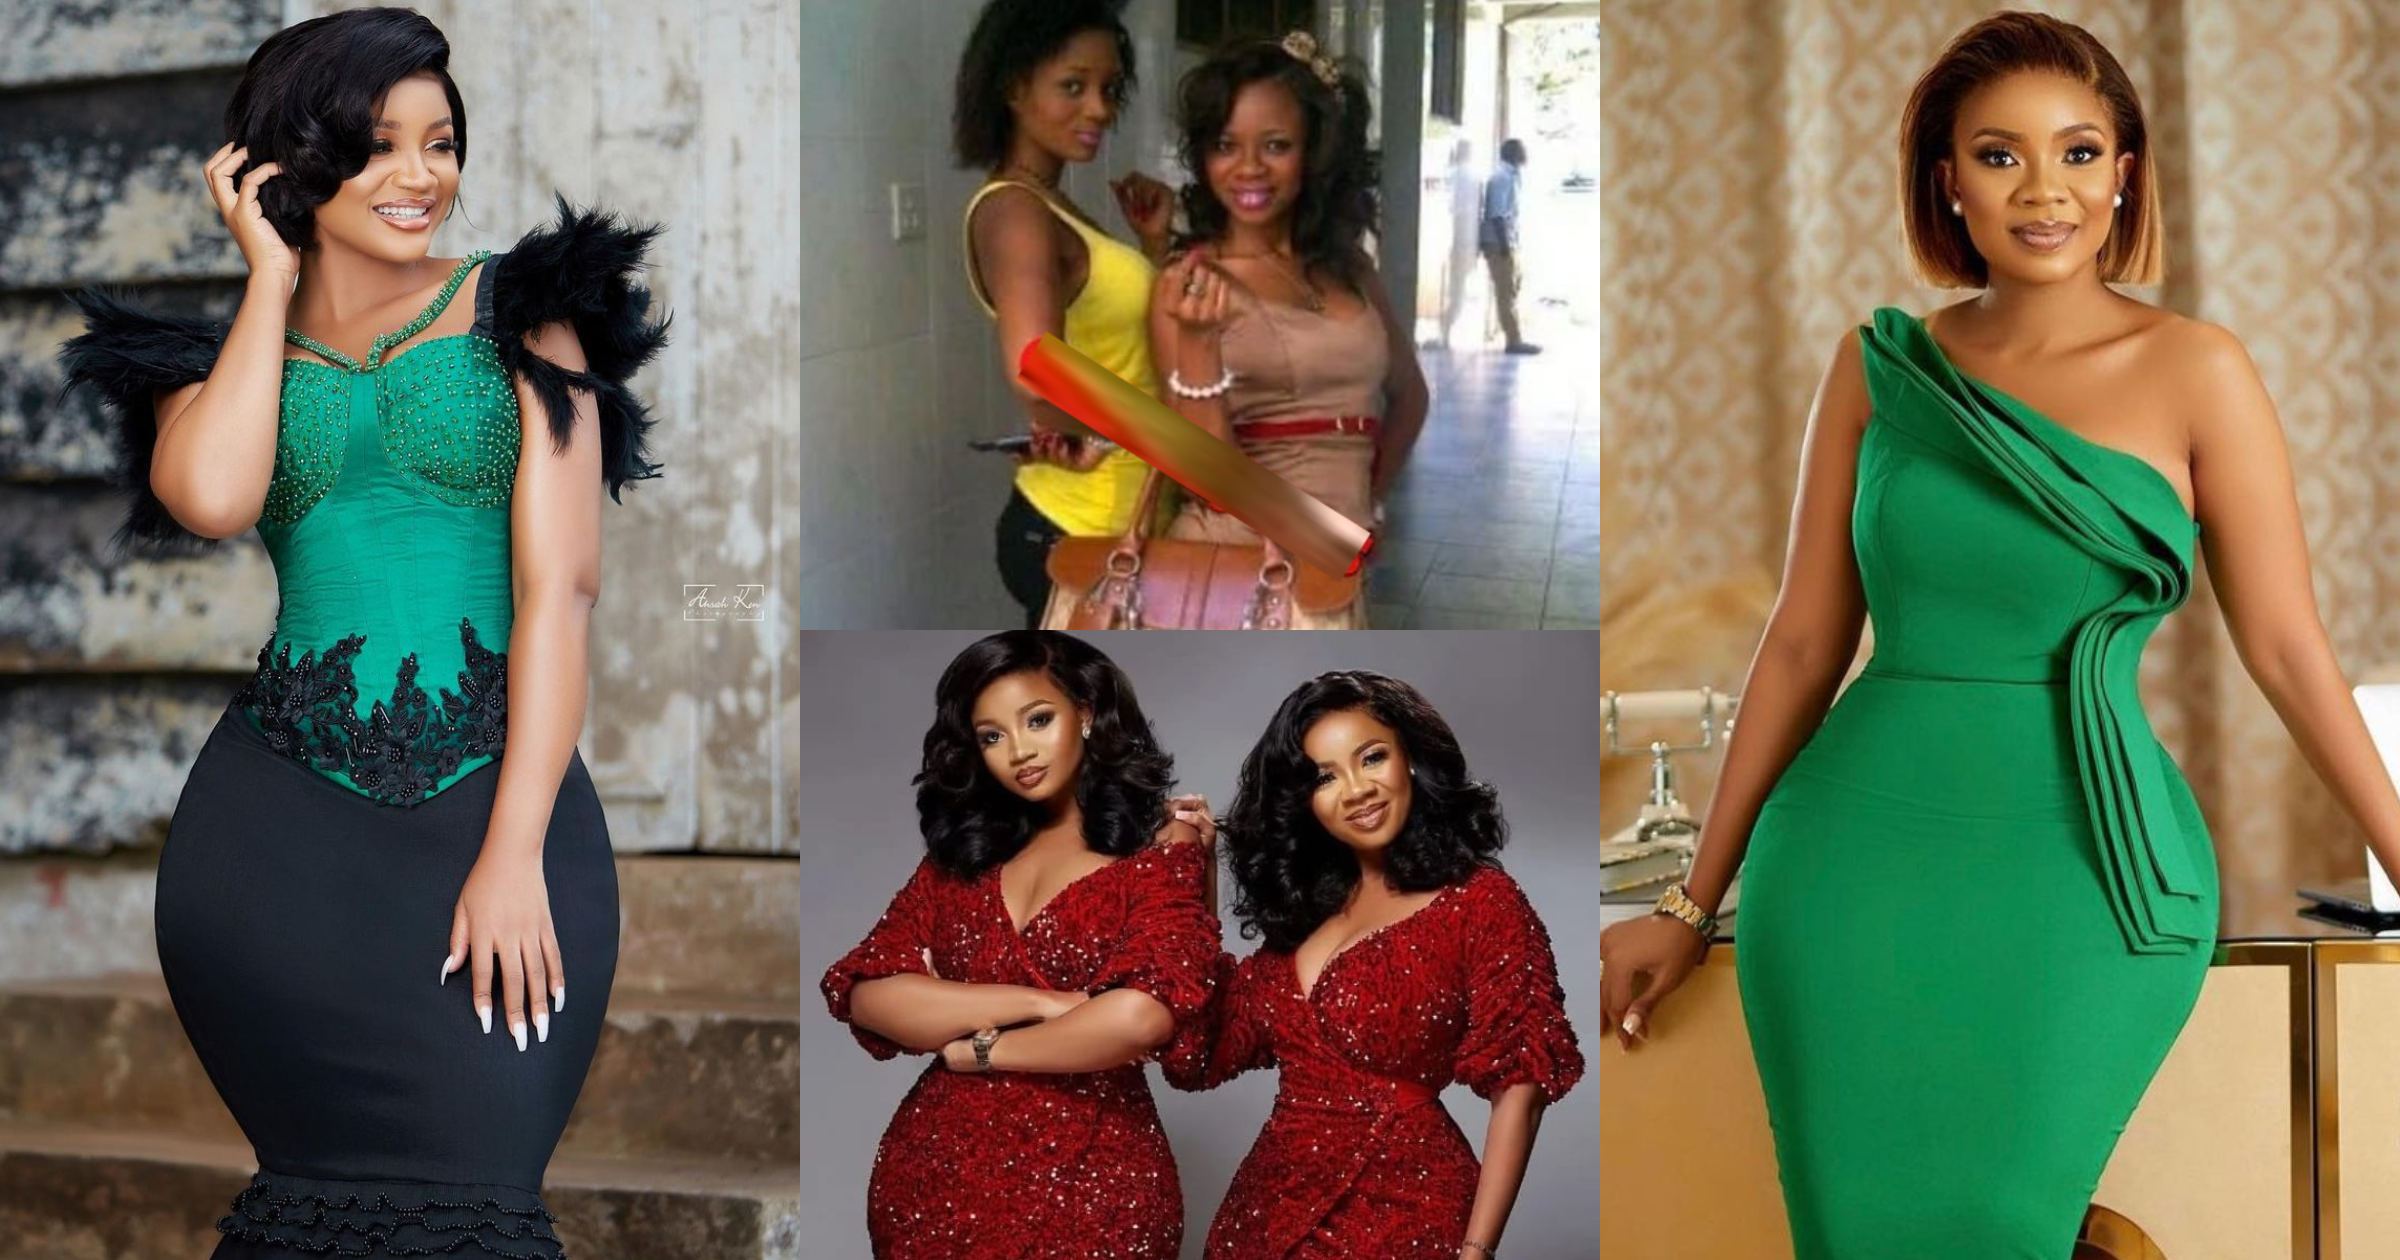 Old photos of Serwaa Amihire and her sister show massive transformation in their figures